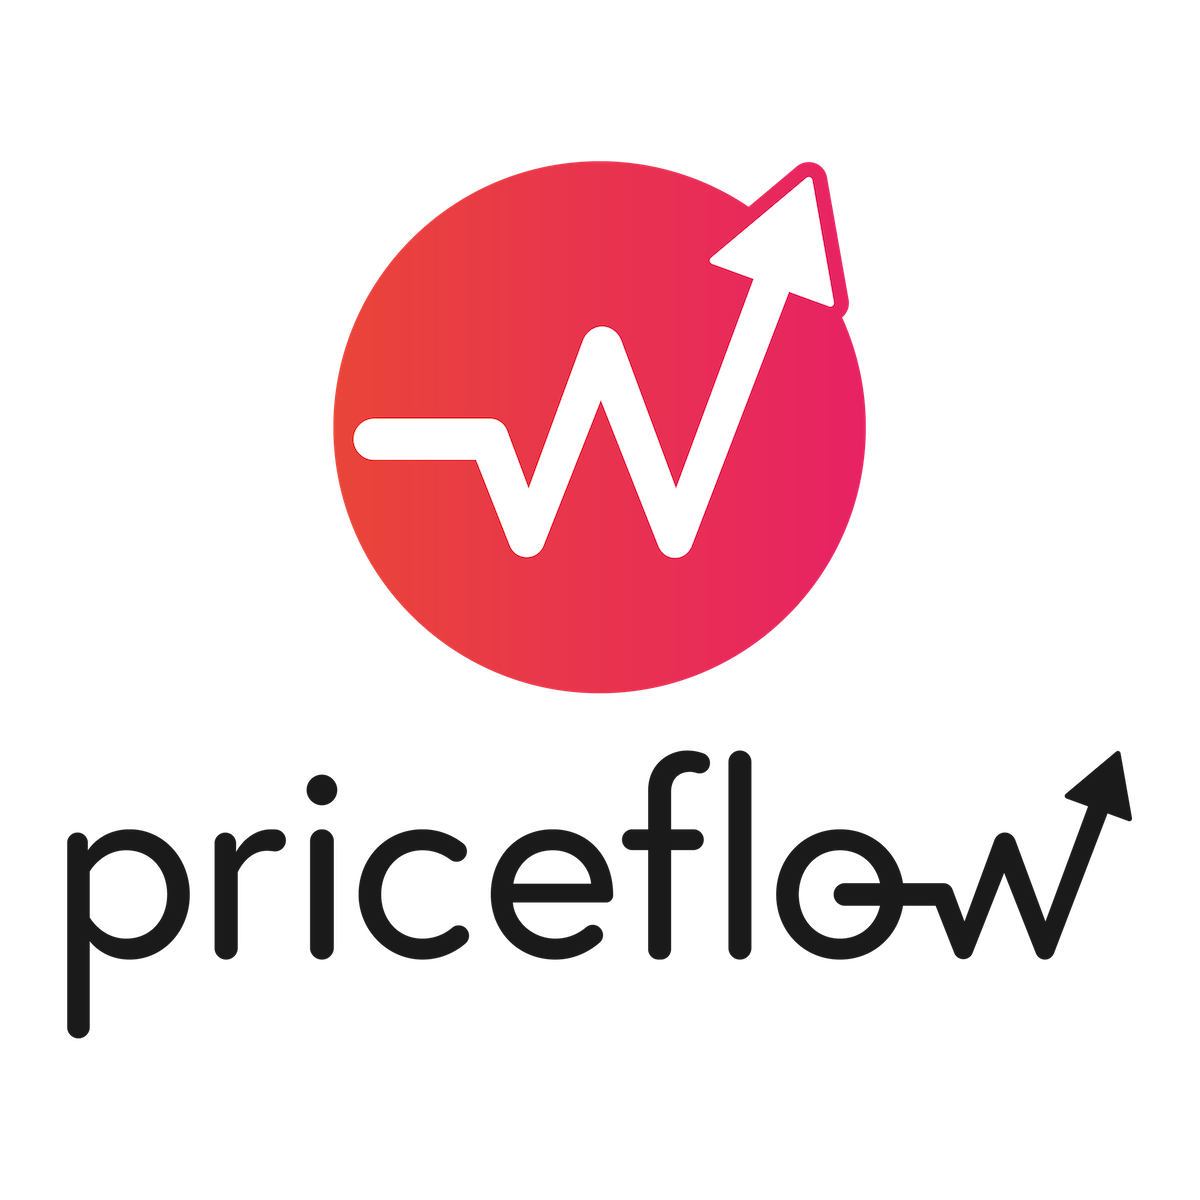 Hire Shopify Experts to integrate Priceflow app into a Shopify store